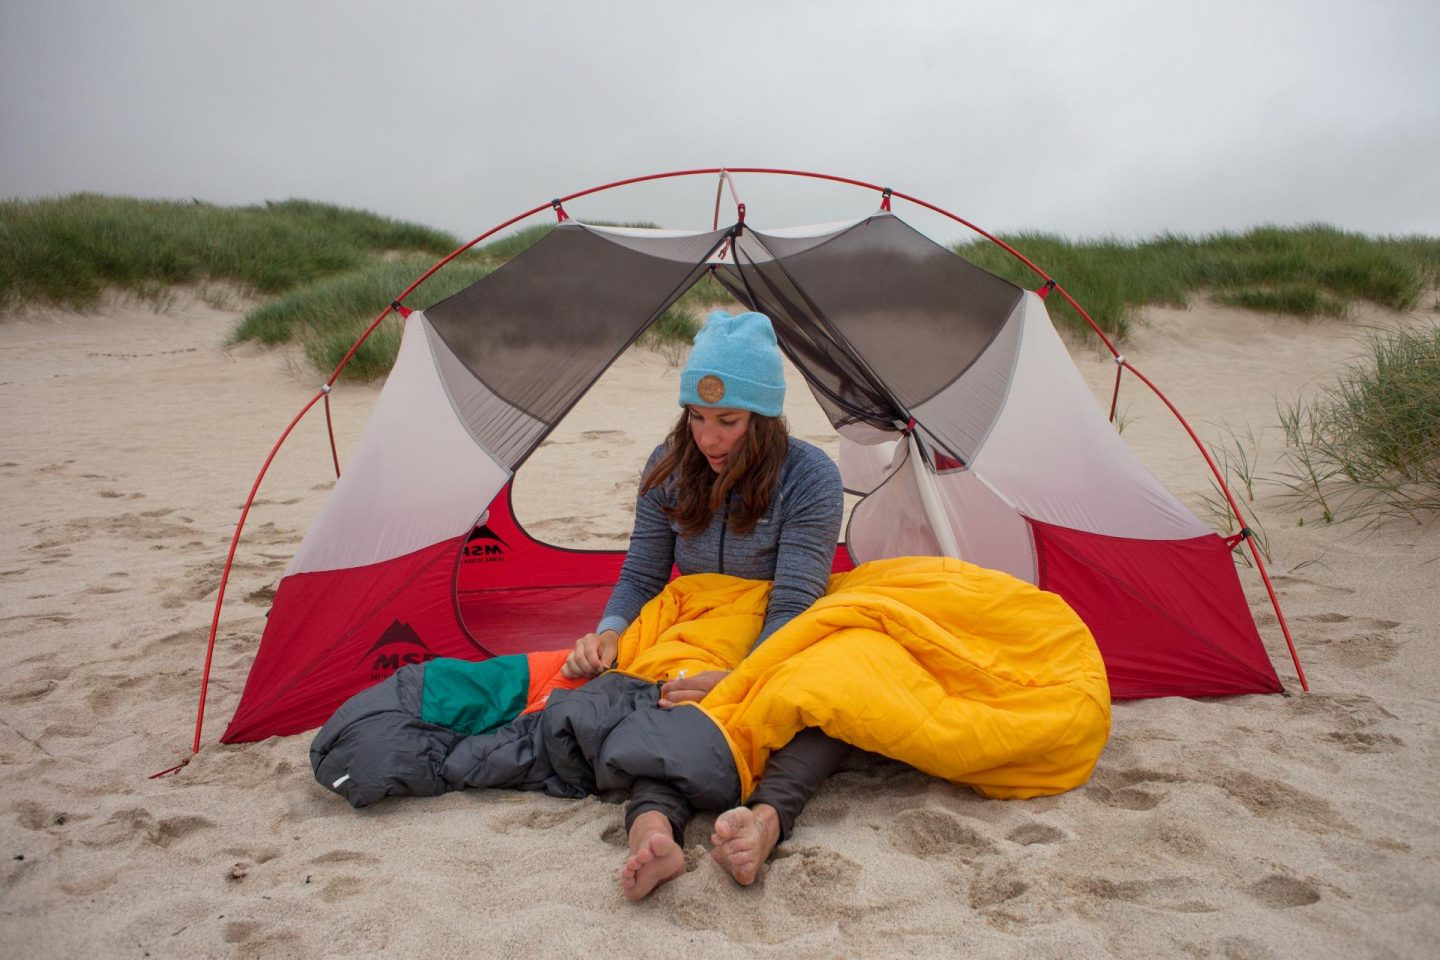 How to look after outdoor kit: cleaning, maintenance and repair for tents